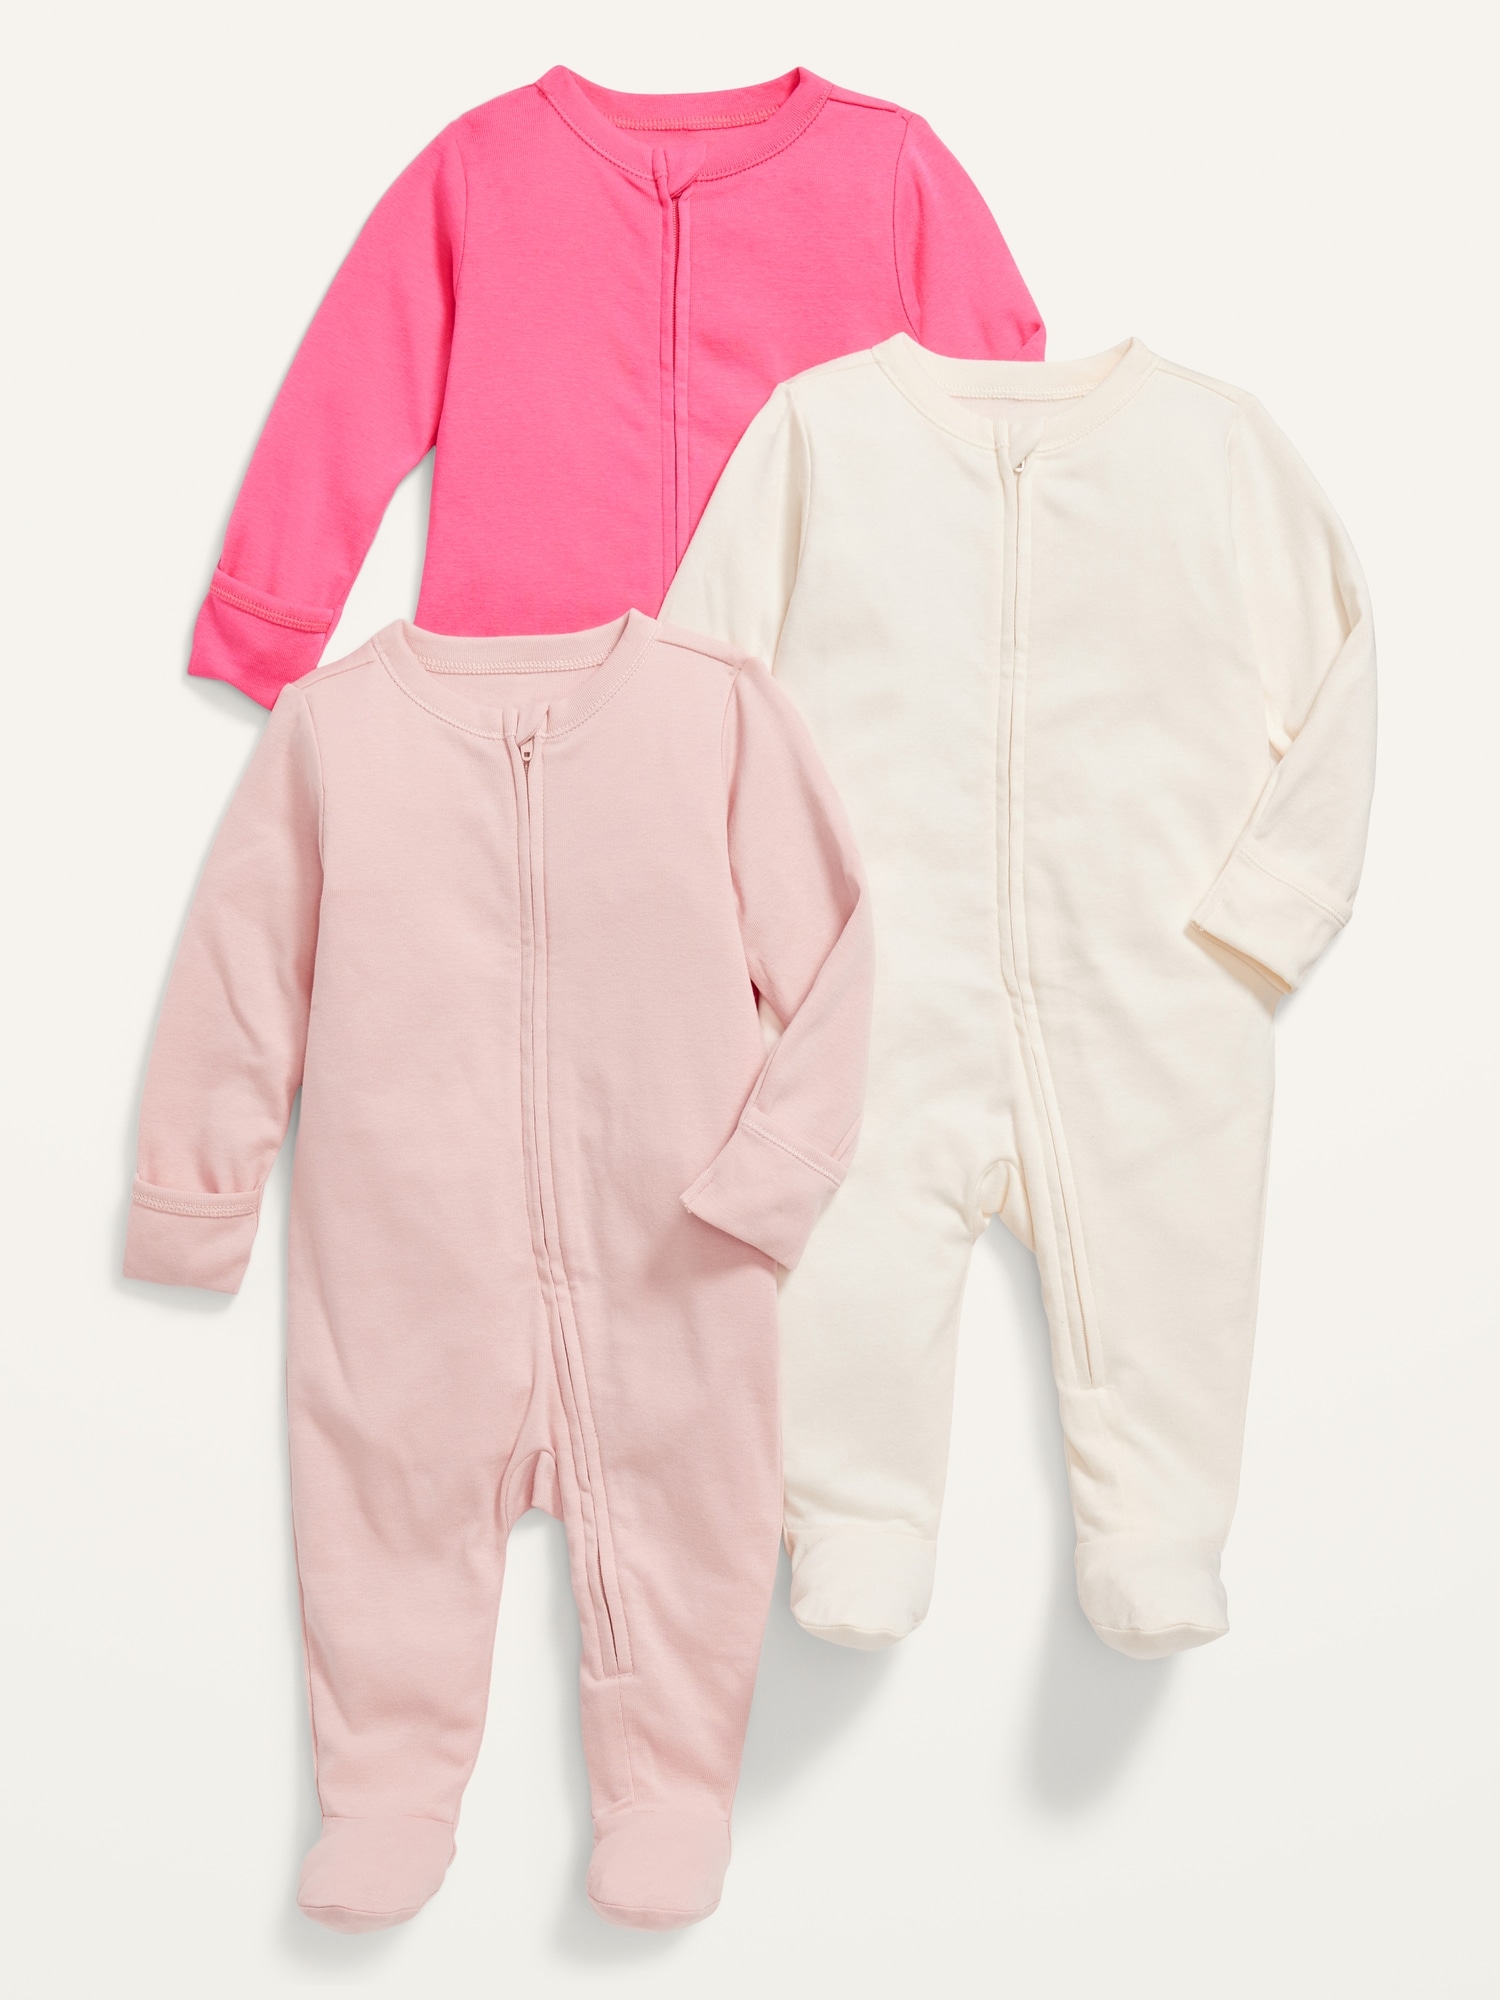 Old Navy Unisex 1-Way Zip Sleep & Play One-Piece 3-Pack for Baby pink. 1